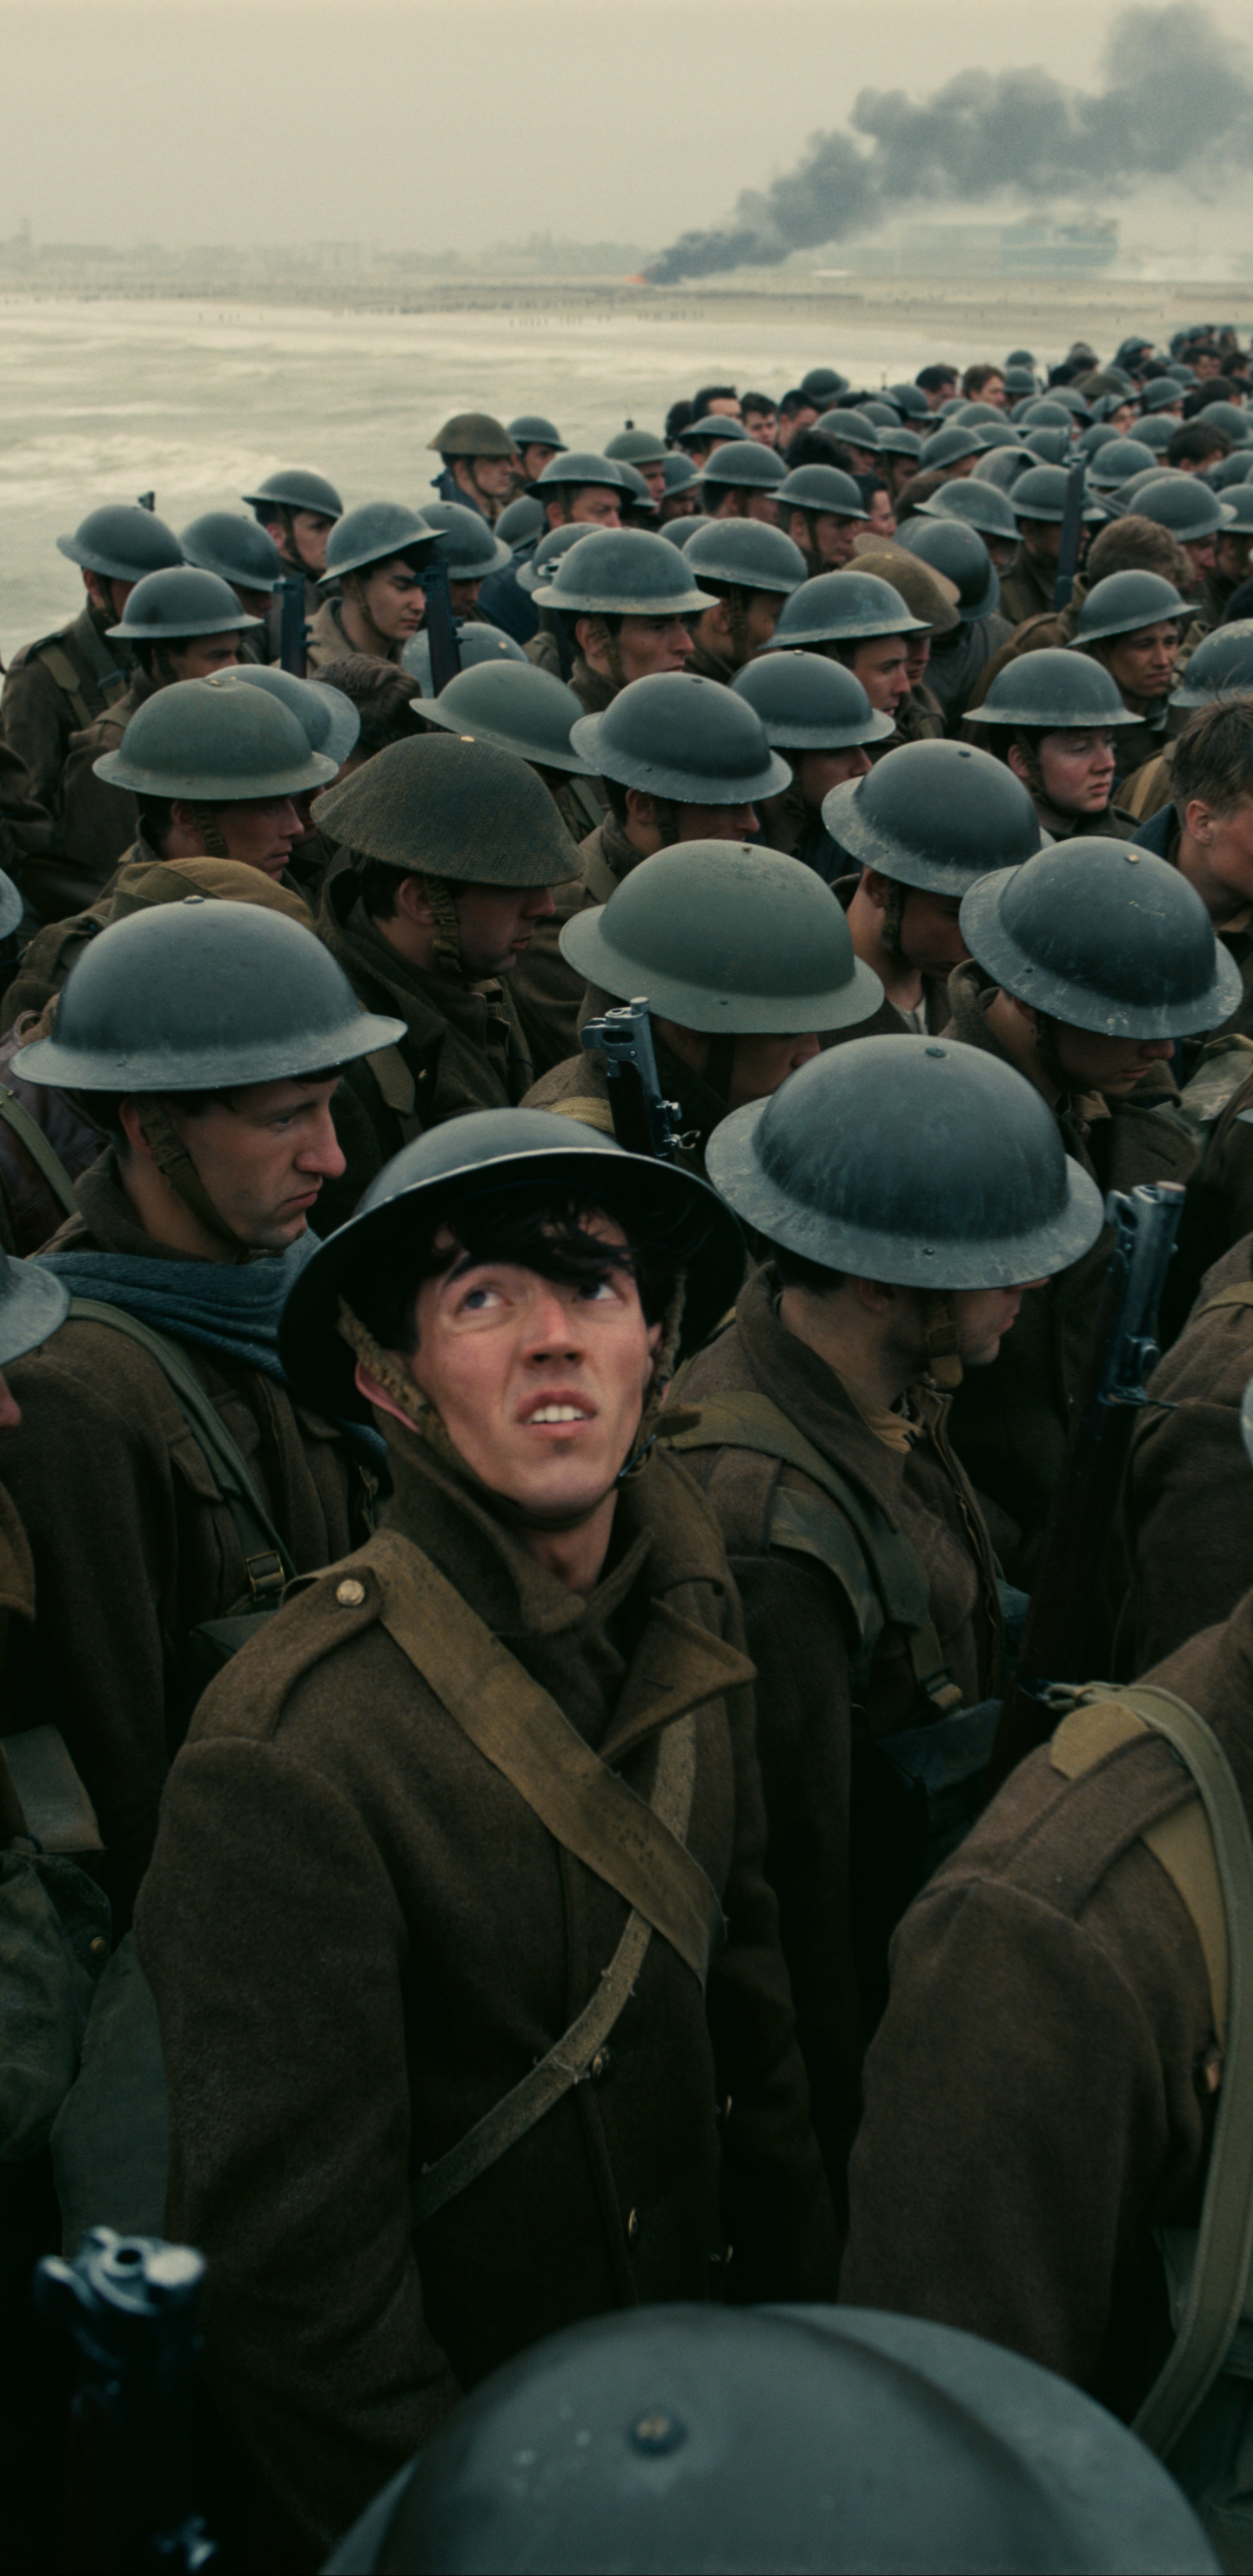 android movie, dunkirk, soldier